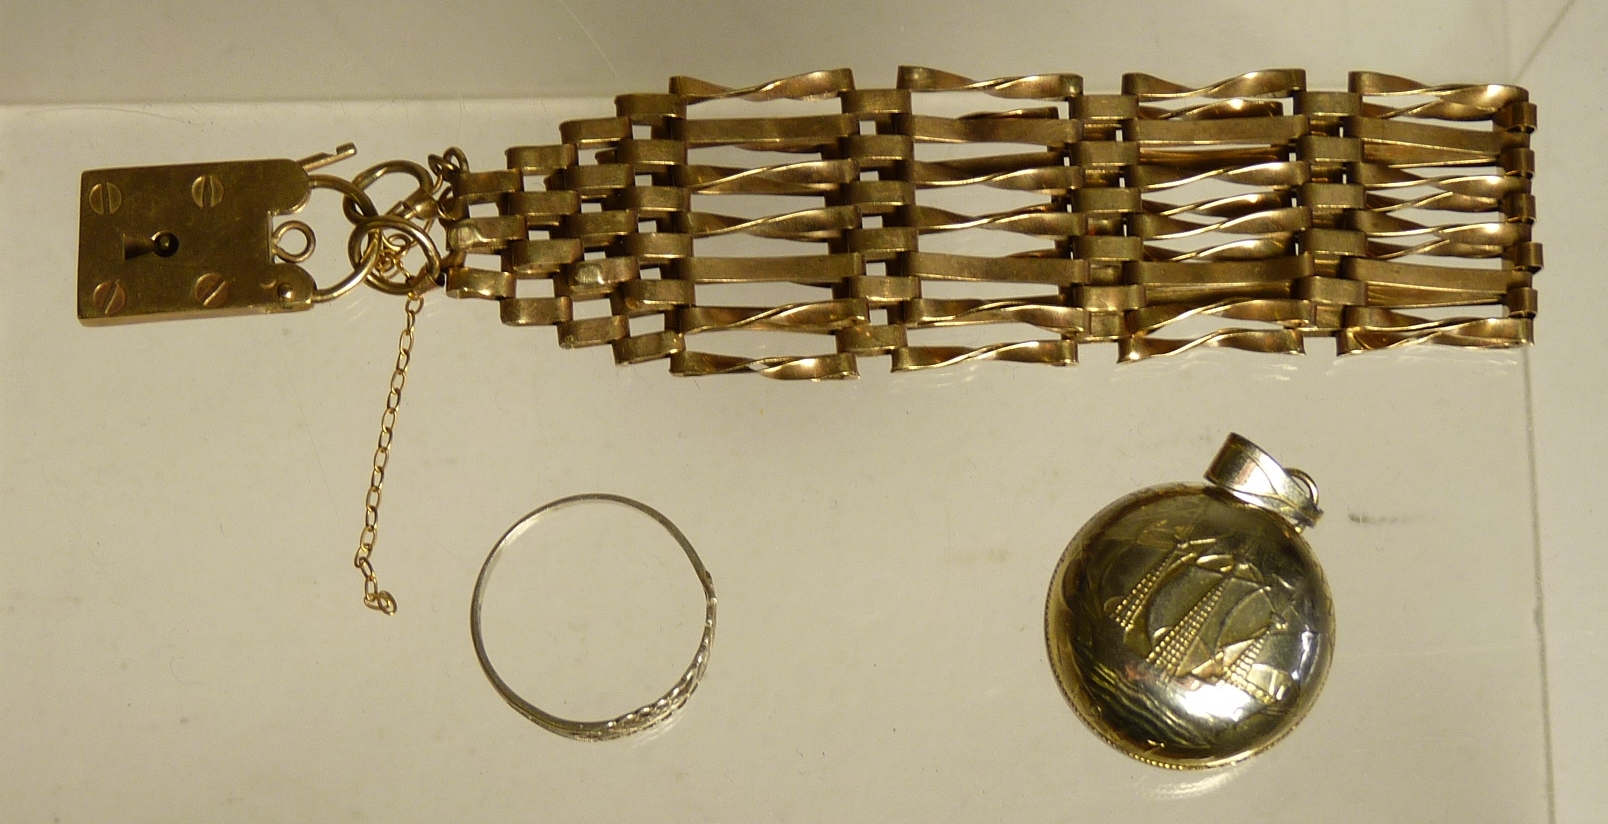 A 9ct rose gold gatelink bracelet with padlock clasp, 14.2g, a small silver ring and a gilded coin